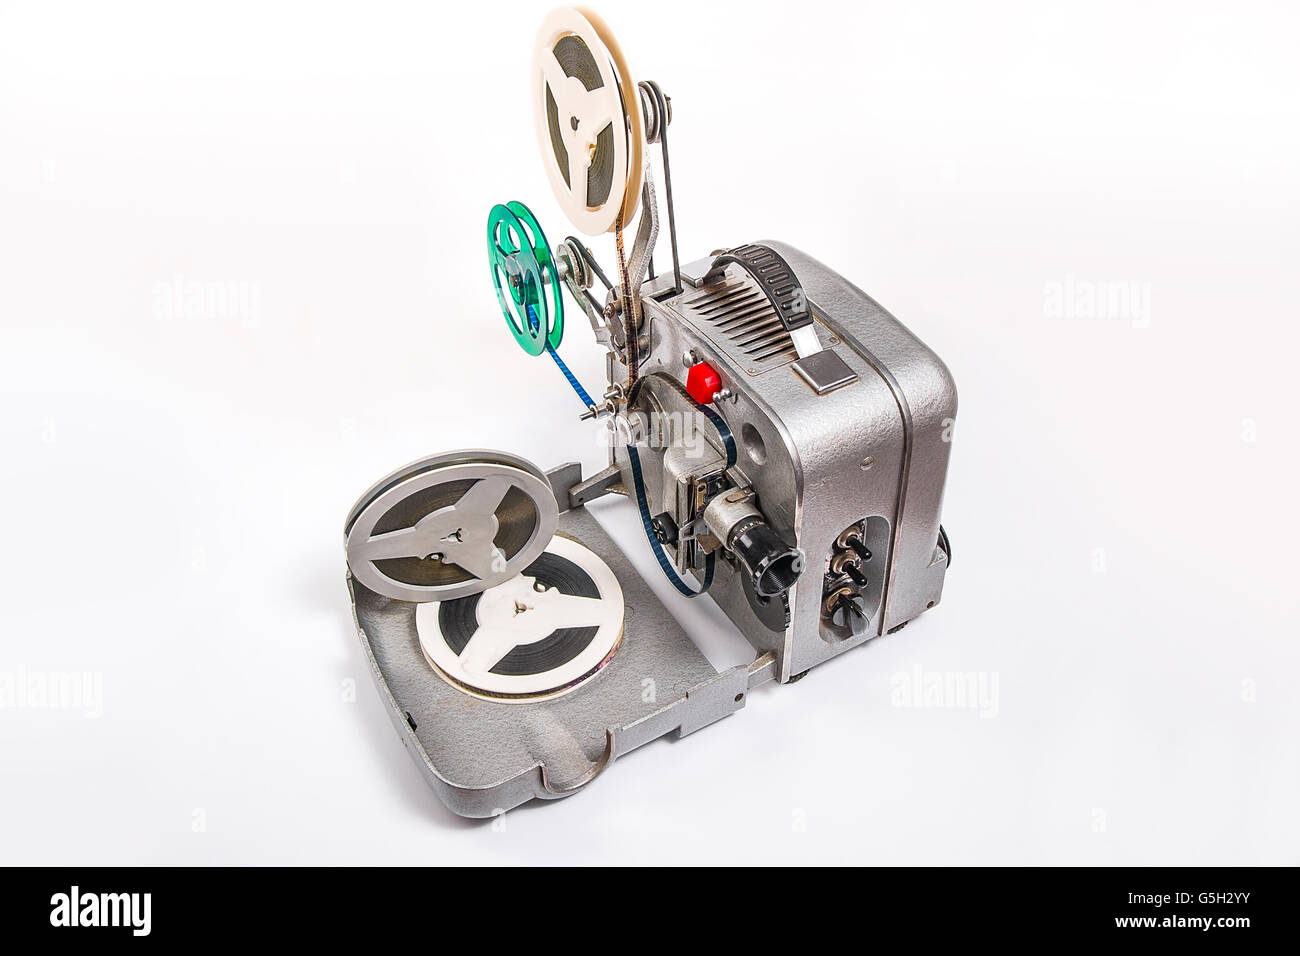 Vintage home movie film projector isolated Stock Photo - Alamy